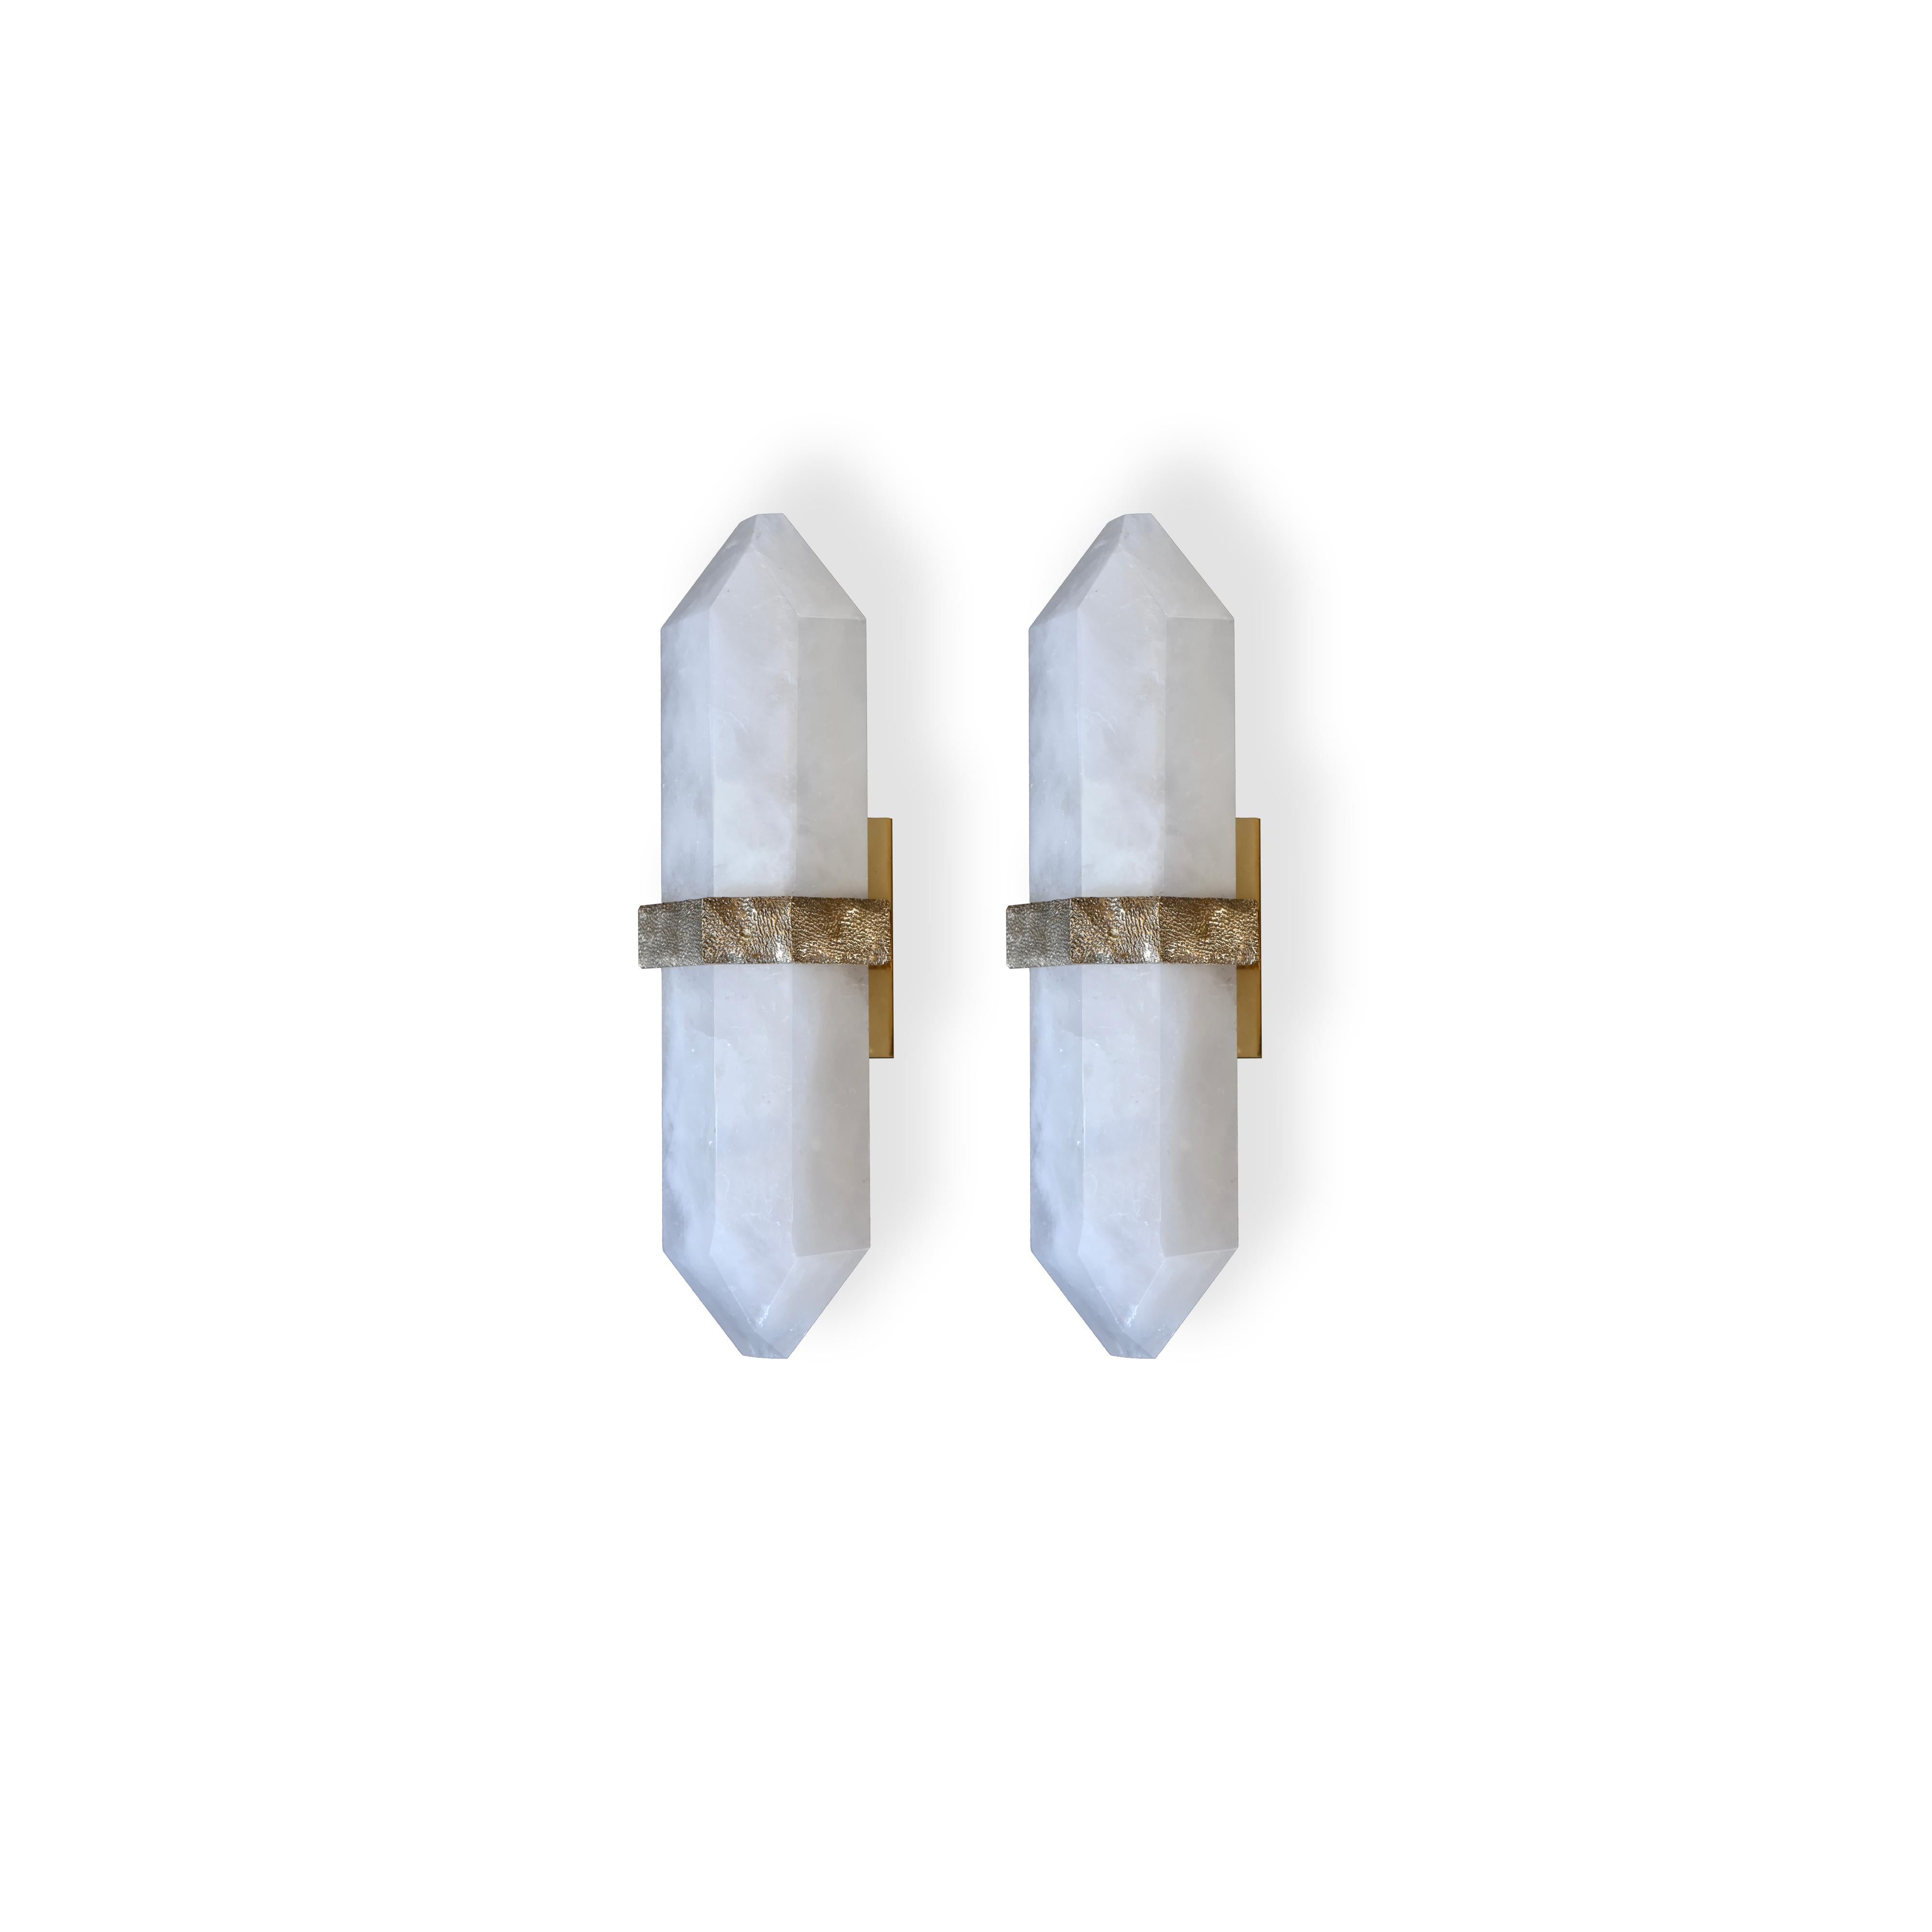 Fine carved diamond form rock crystal quartz wall sconces, mount with rich texture of cast brass decoration, created by Phoenix Gallery NYC. 
Custom size, finish, and quantity upon request. 
Each sconce installed two sockets, and will include two